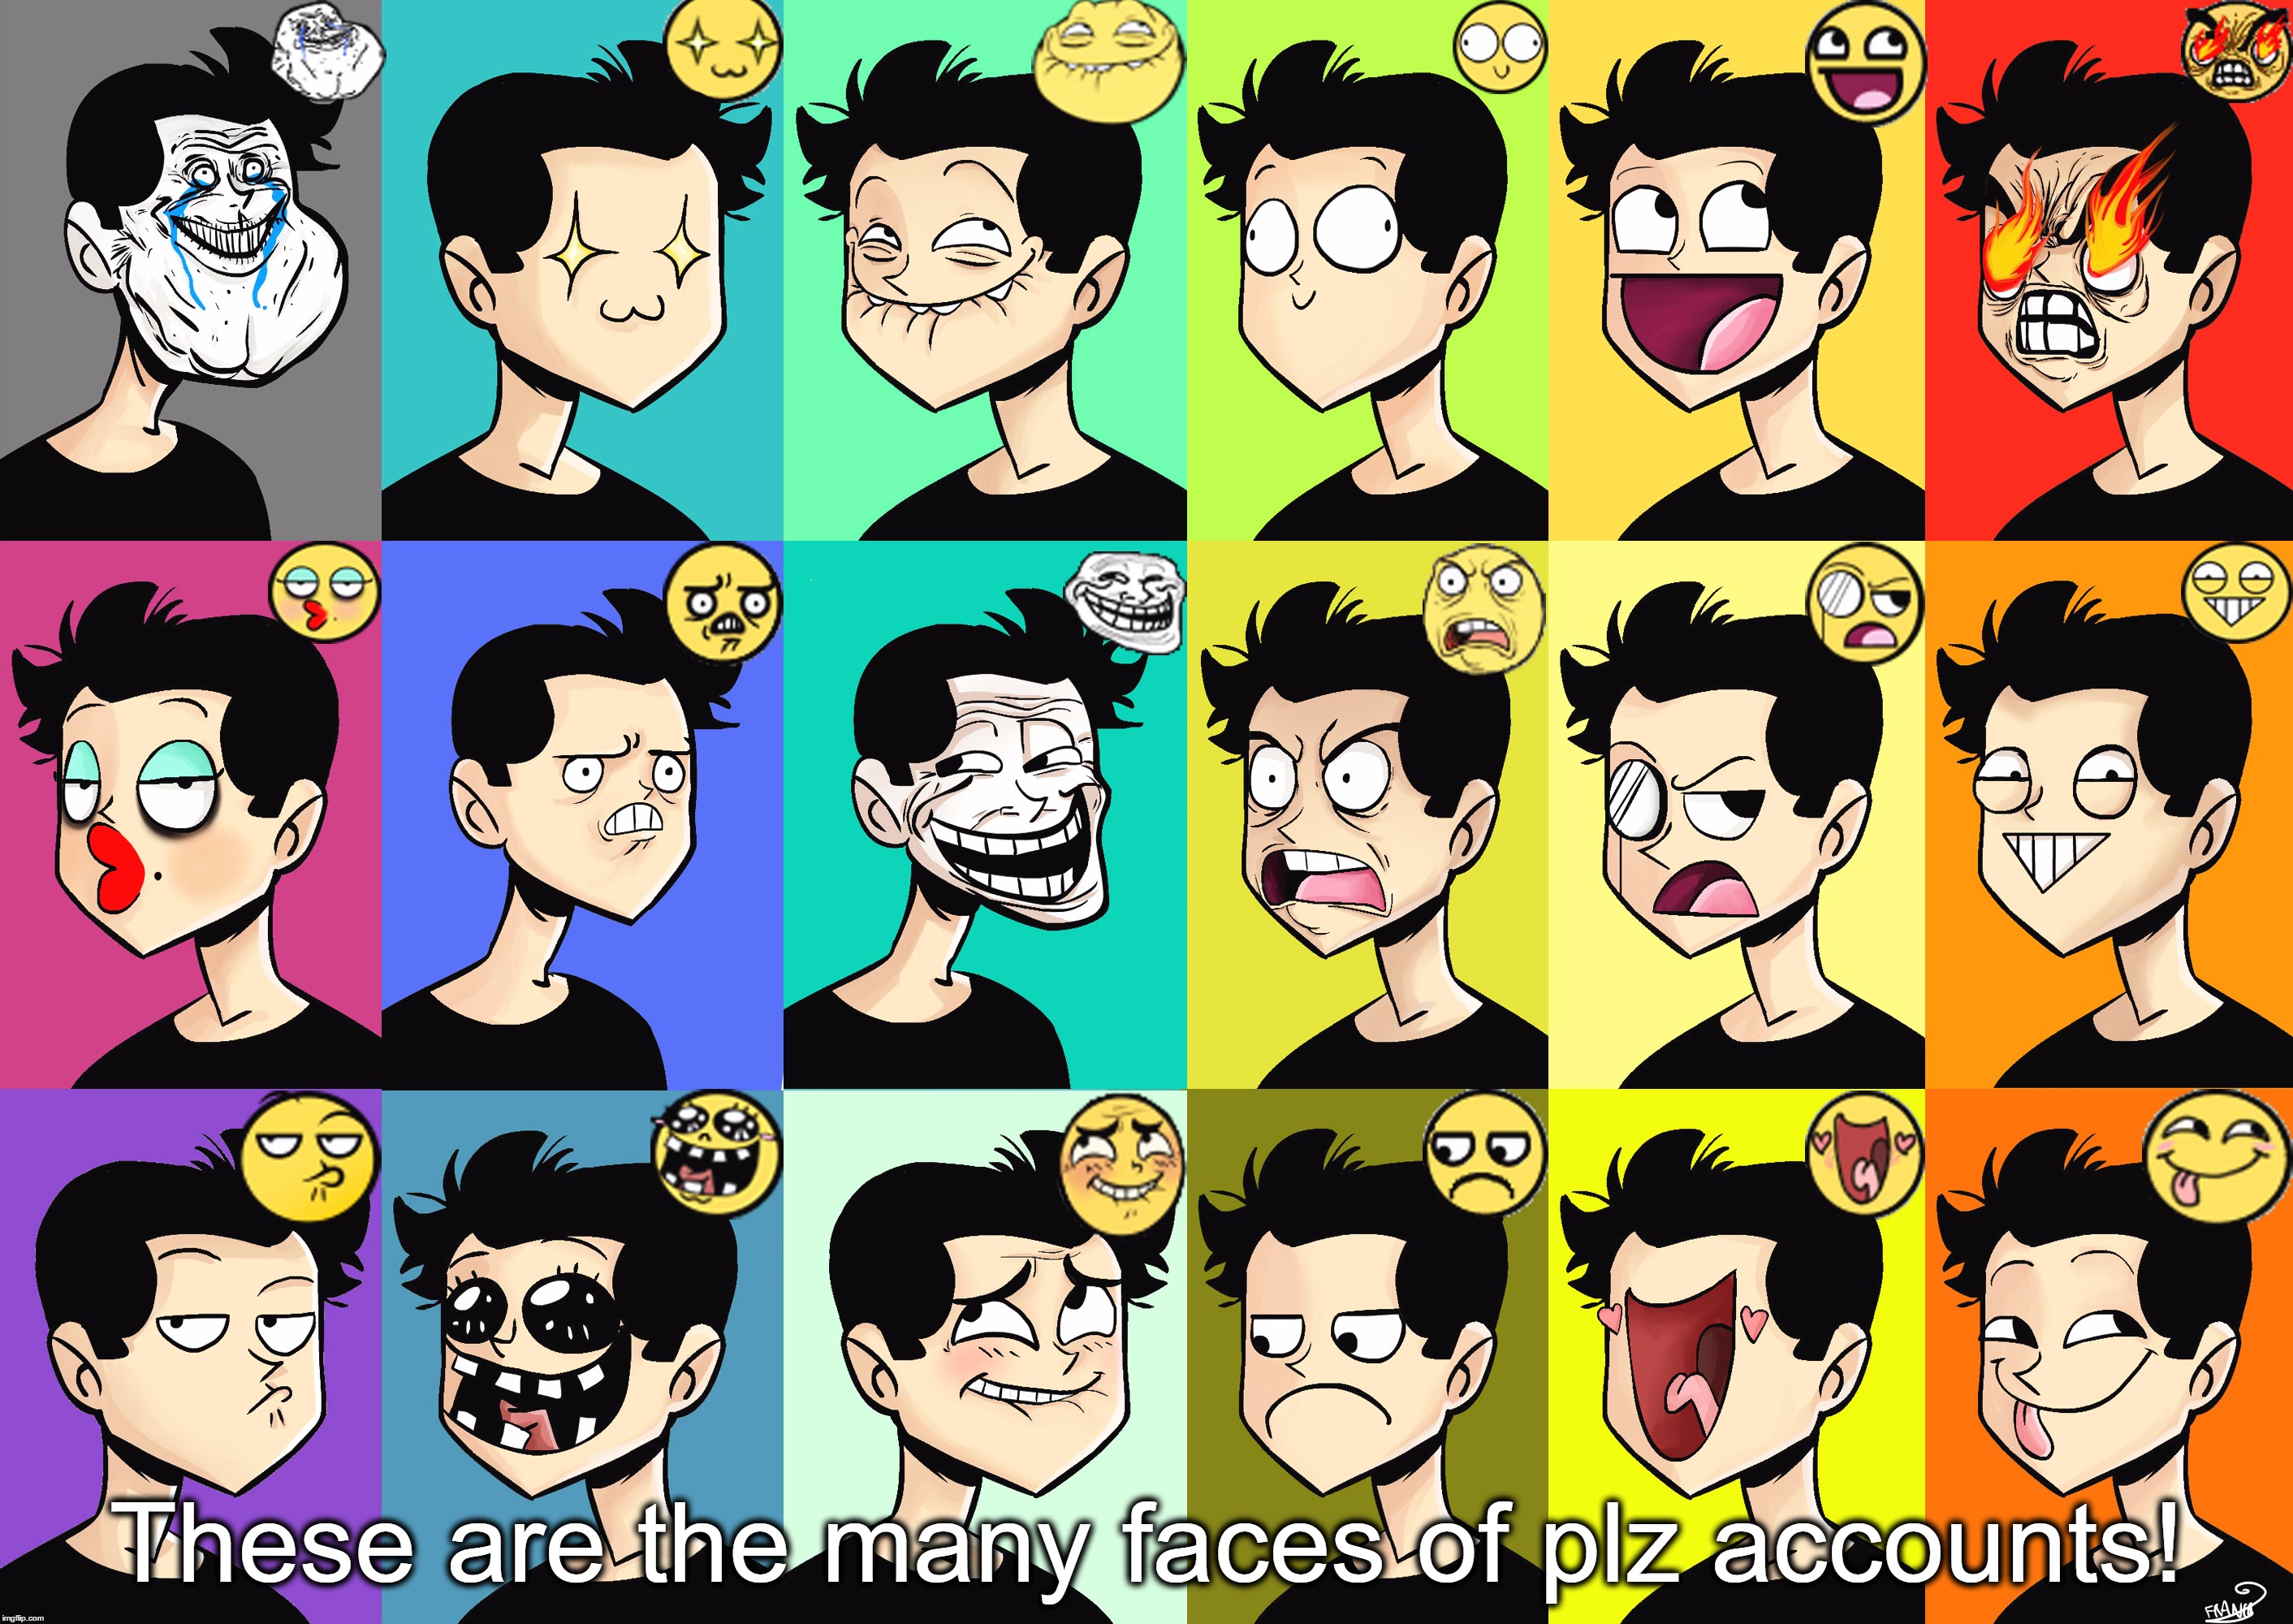 Mister Fail Plz By Chillyfranco (For Deviantart Week) | These are the many faces of plz accounts! | image tagged in deviantart week,deviant art week,plz,accounts,funny,memes | made w/ Imgflip meme maker